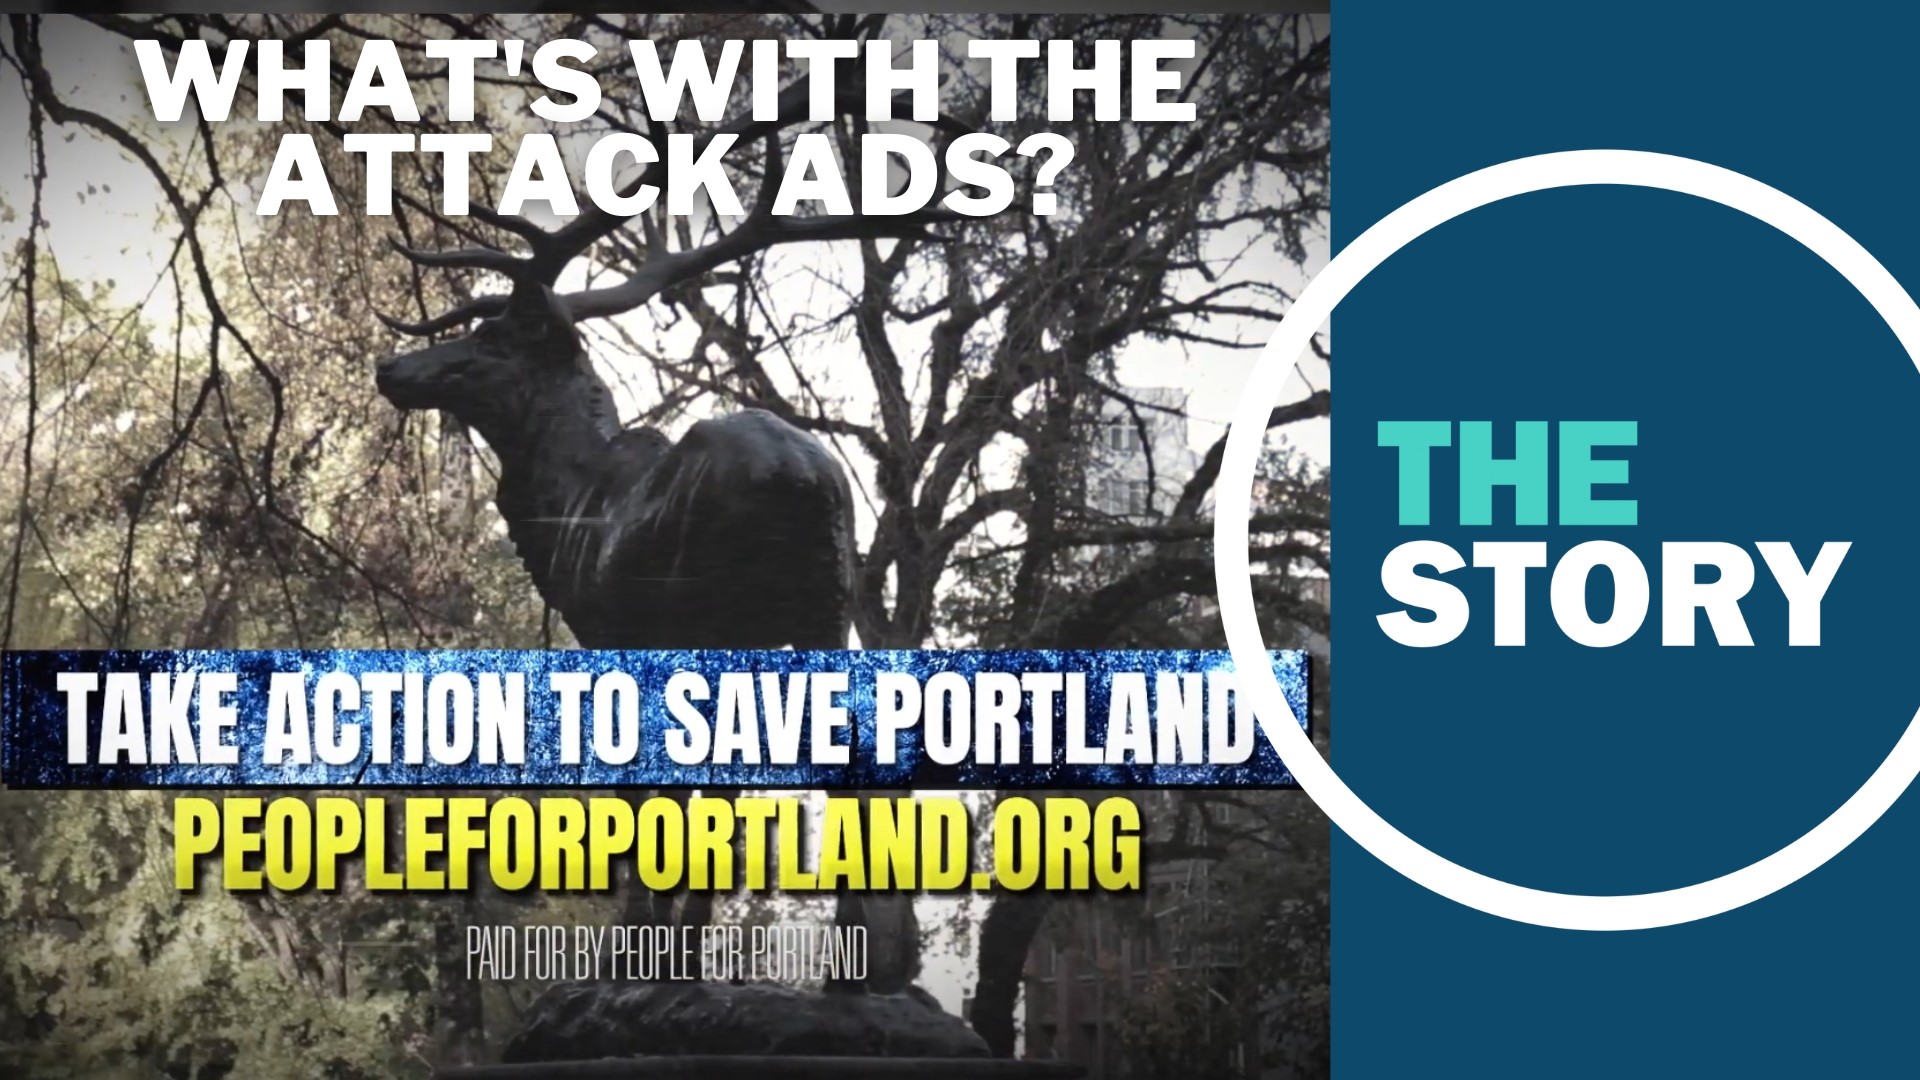 “People For Portland” has been bankrolling the ads. They target Schmidt and other local leaders, criticizing their handling of crime.